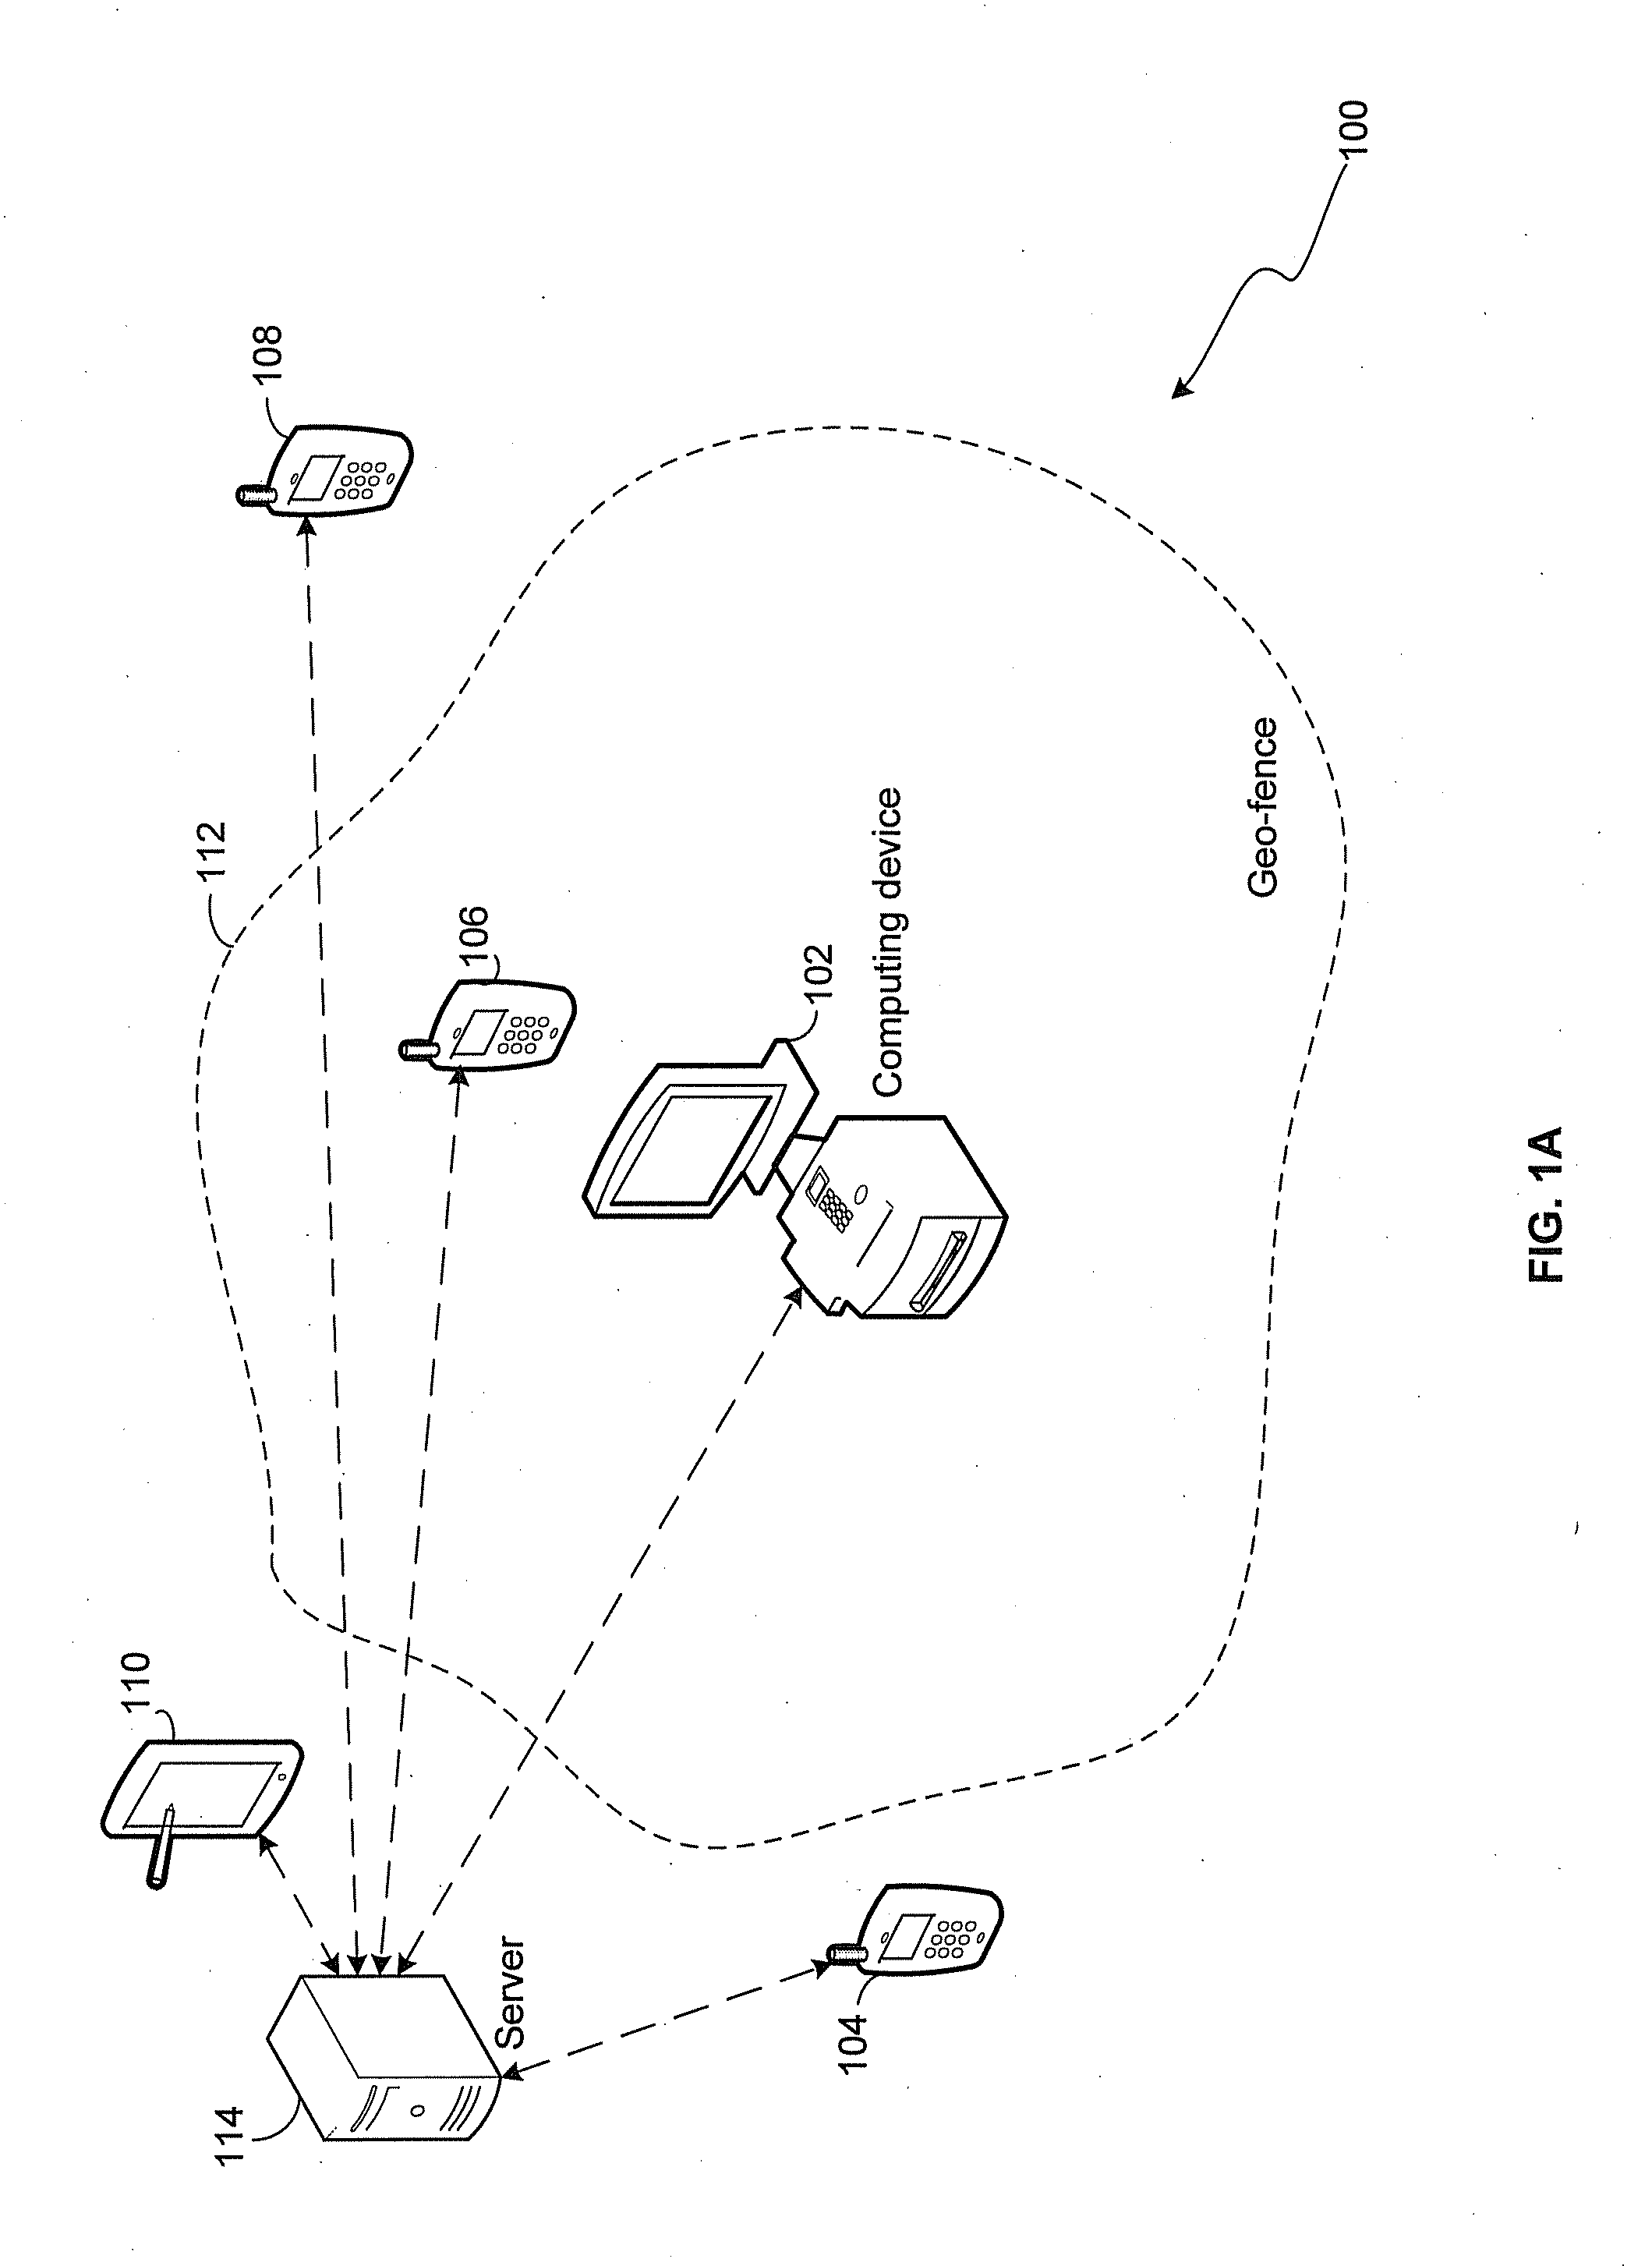 Method and System for Location Based Hands-Free Payment